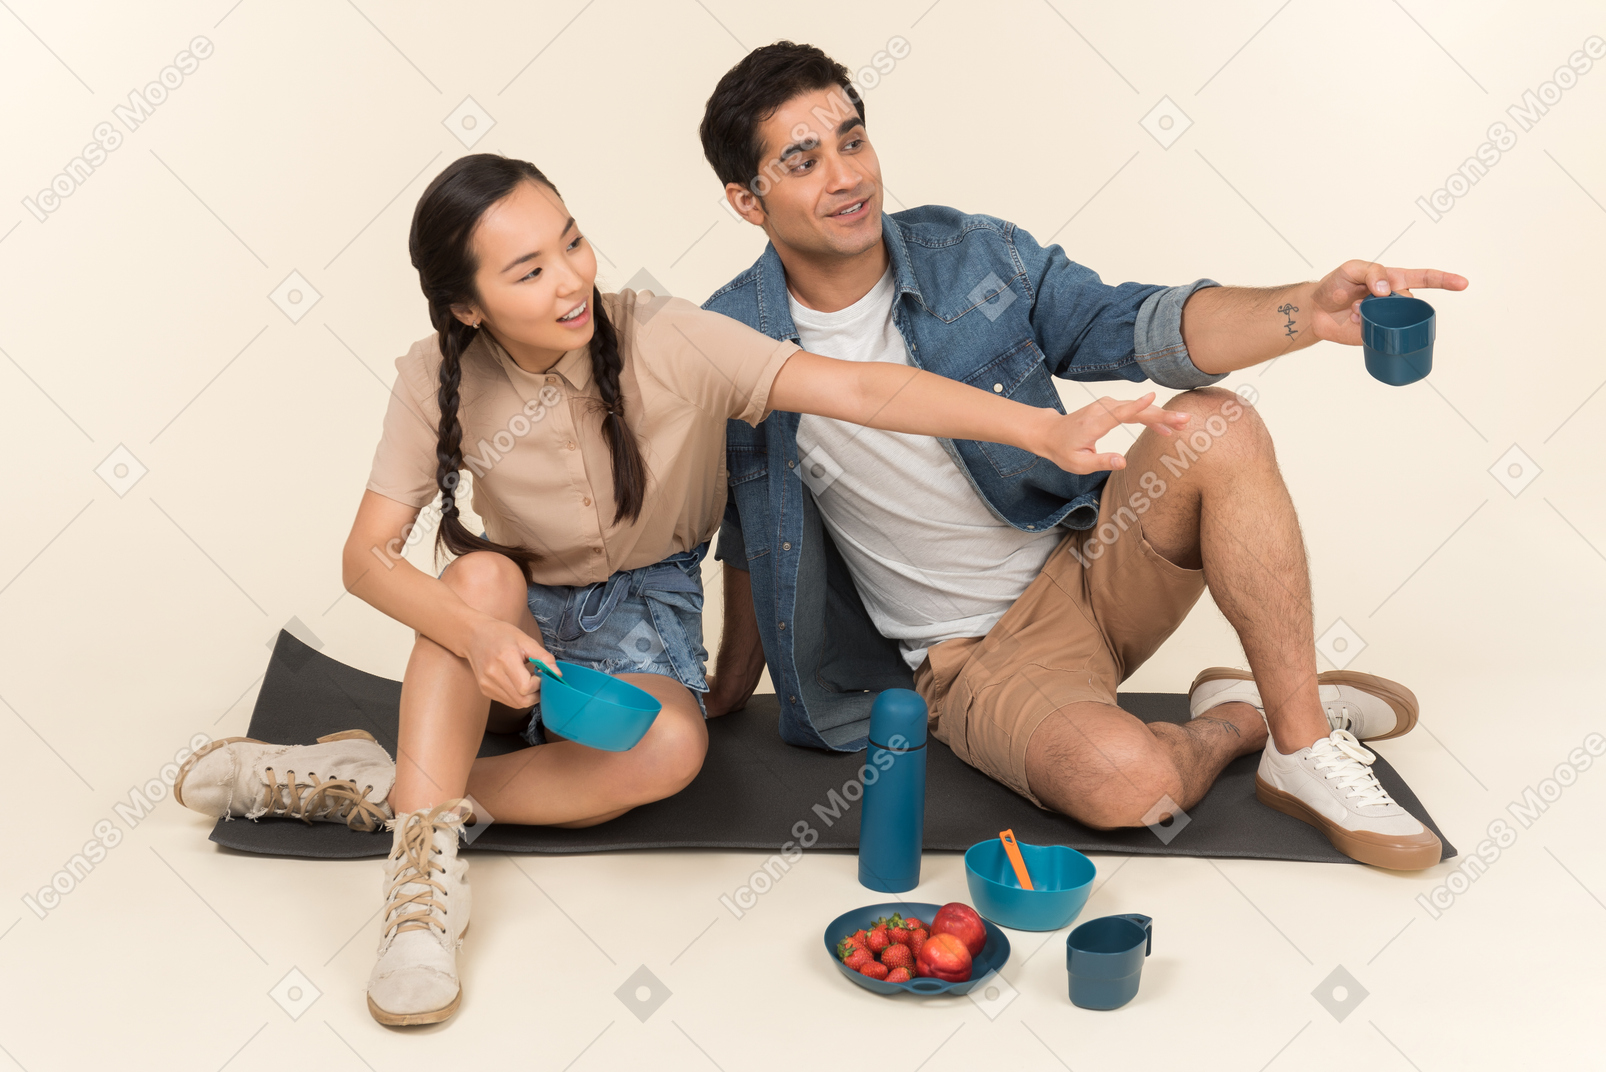 Young interracial couple sitting on karimat and pointing